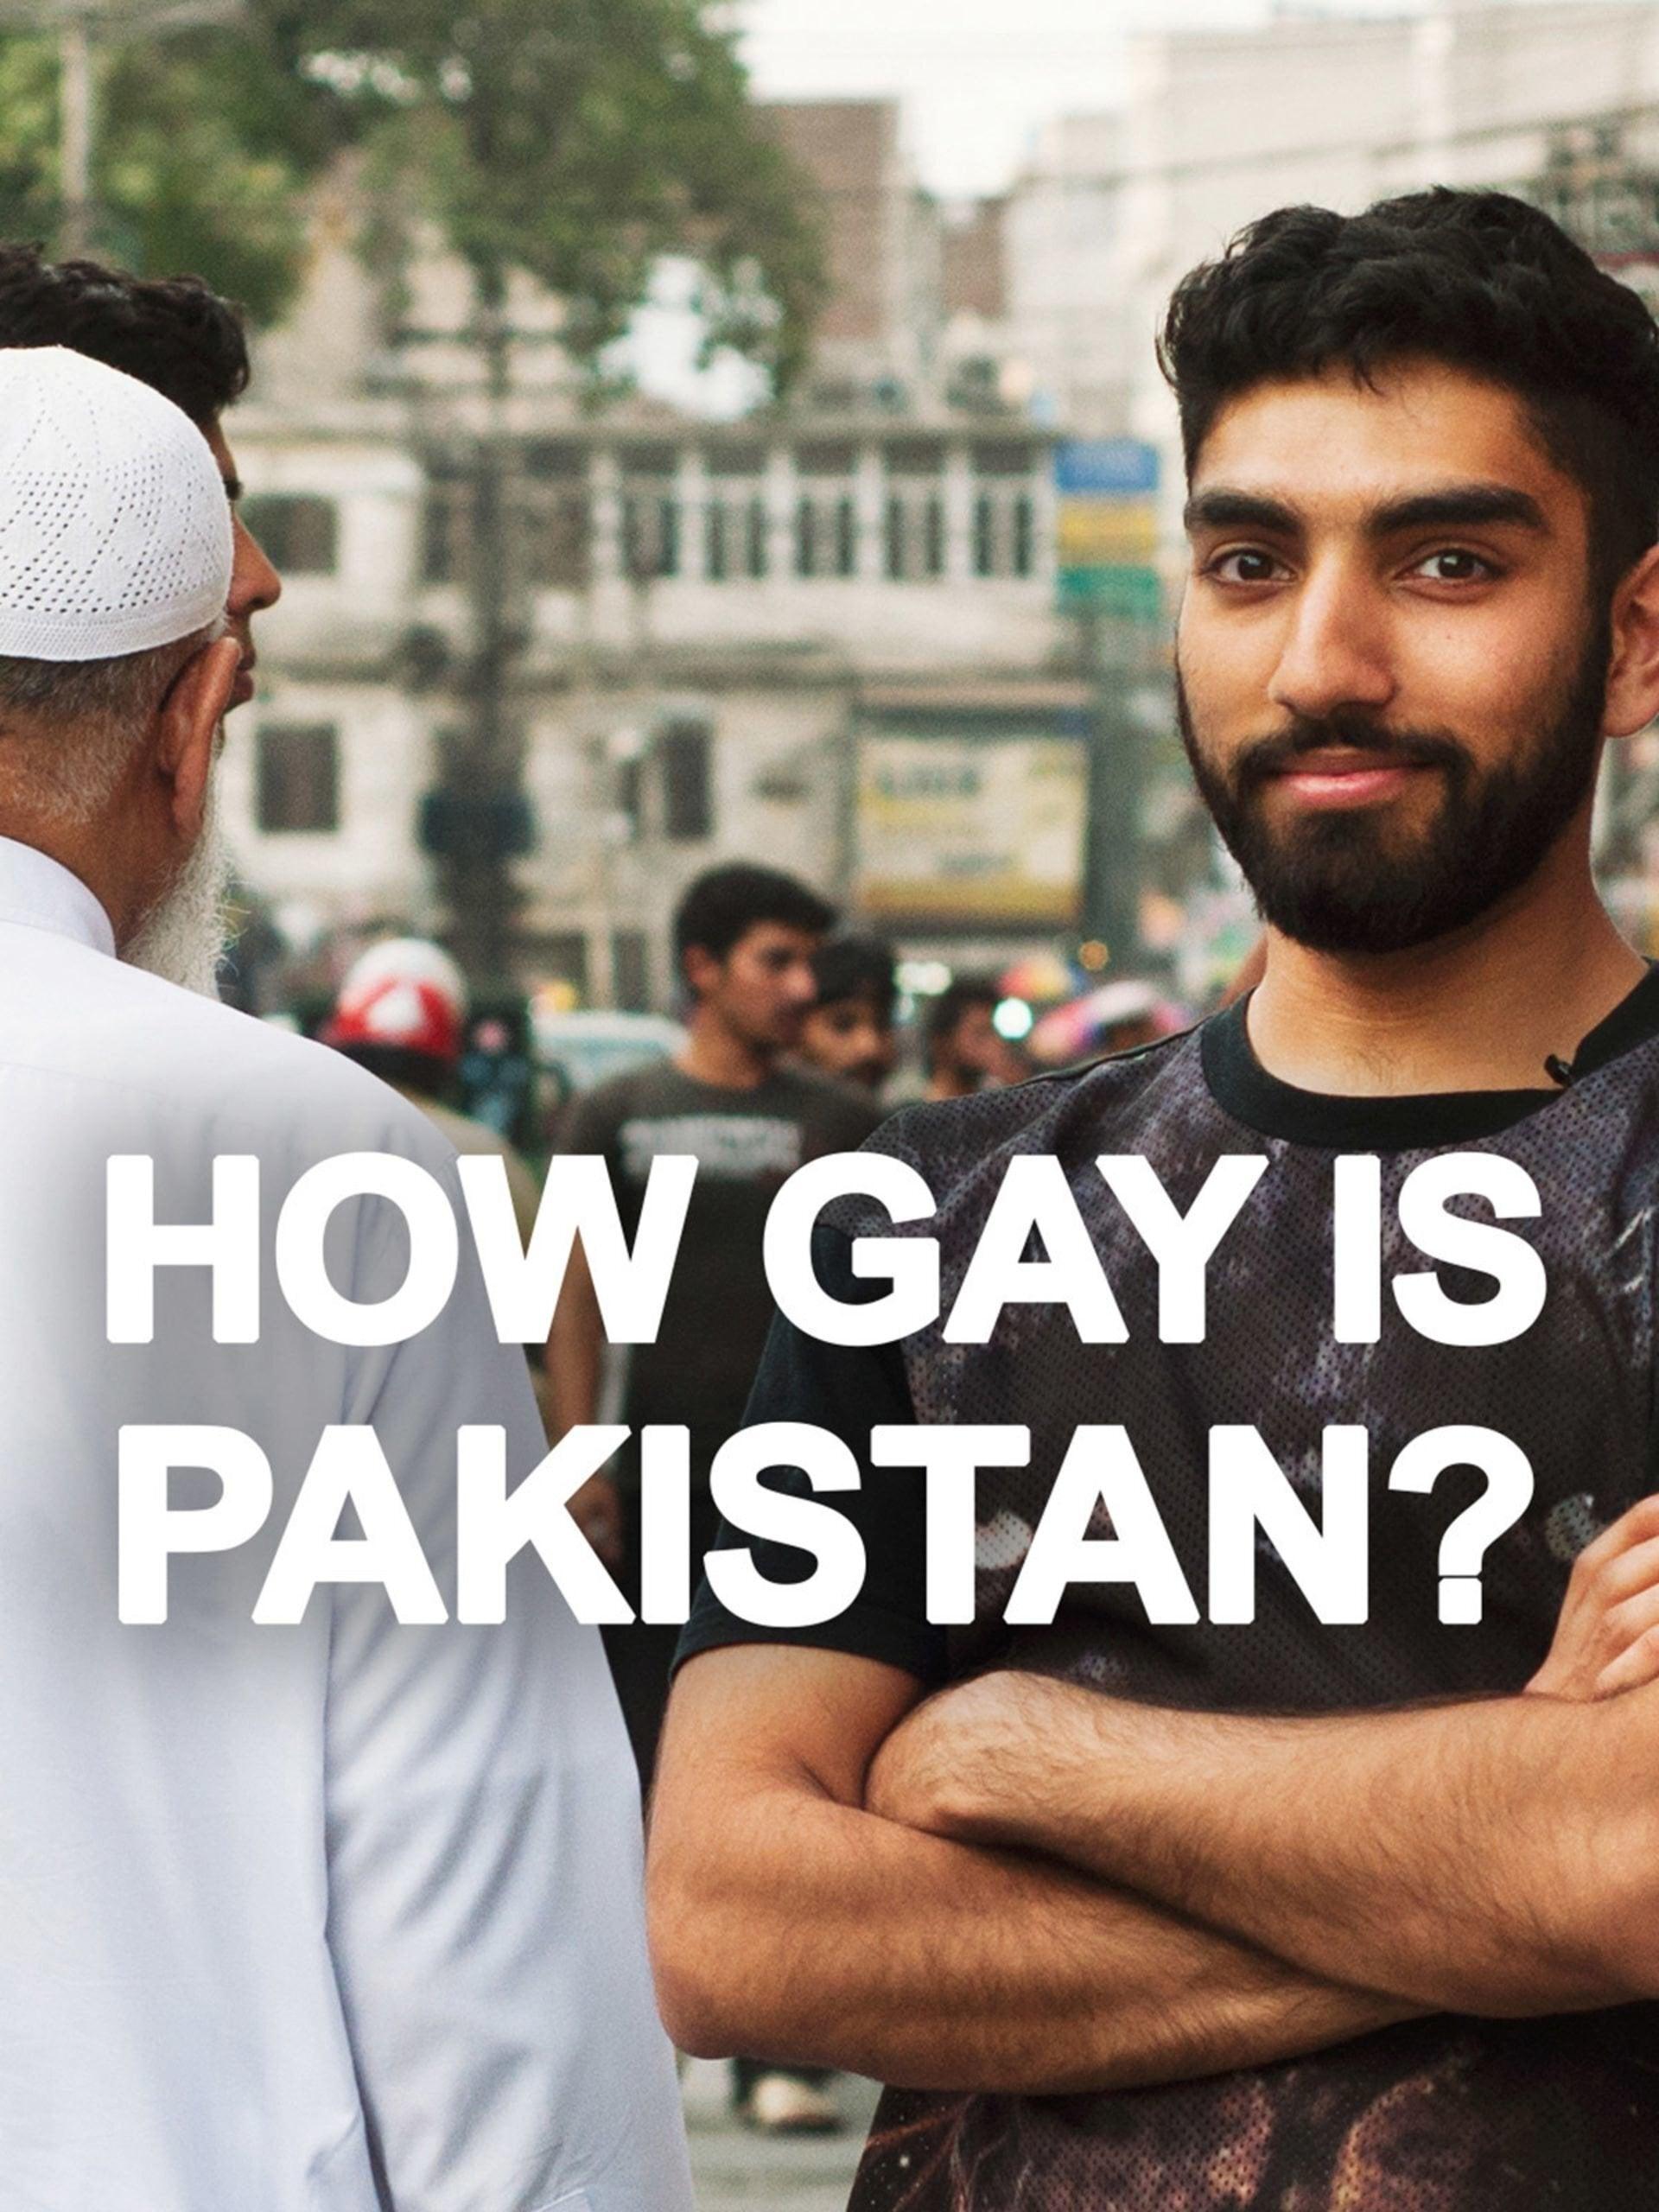 How Gay Is Pakistan? poster